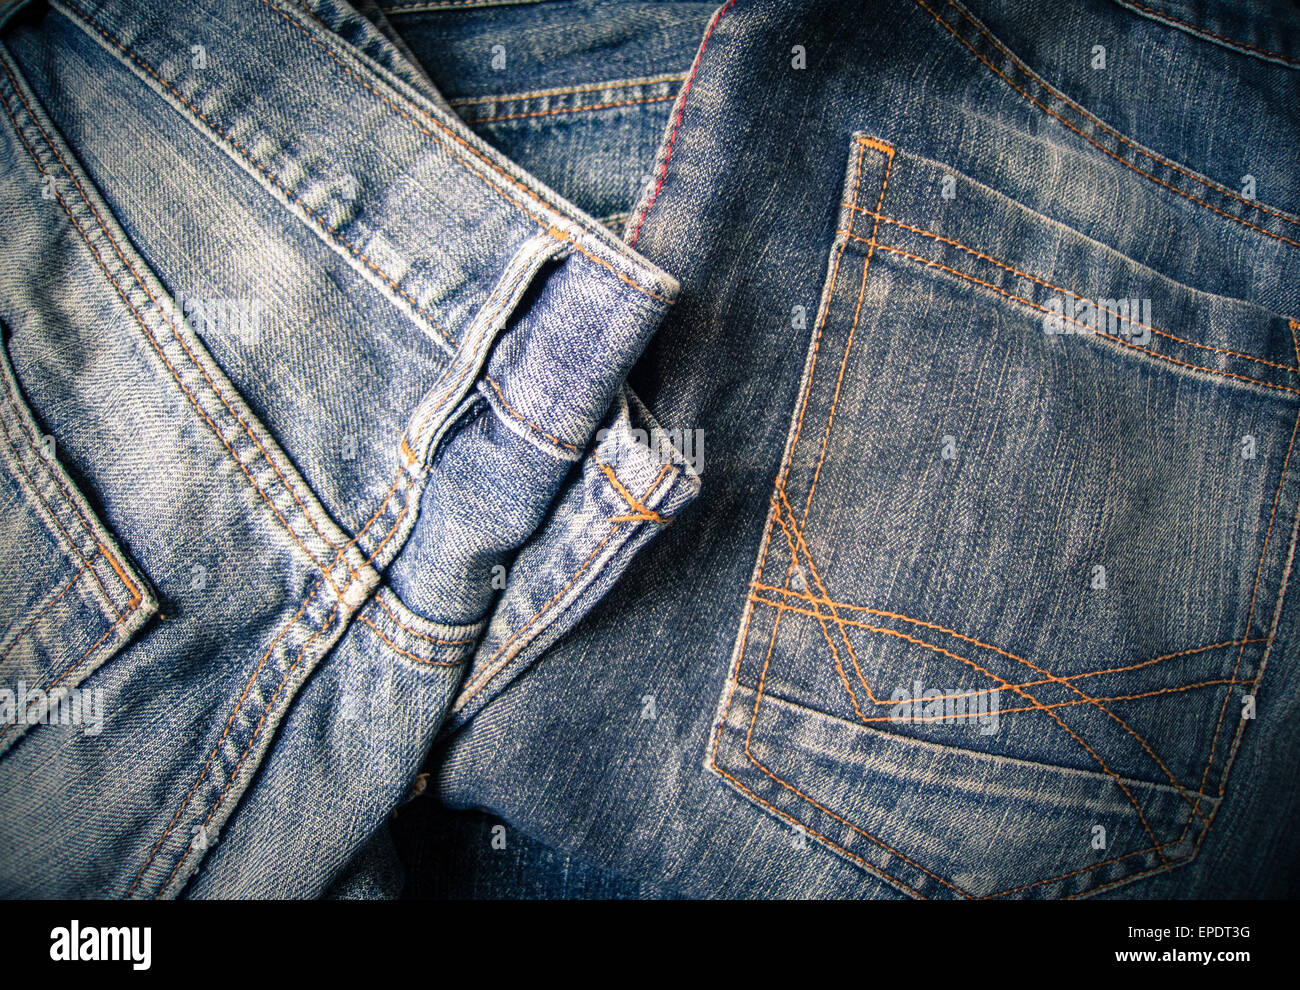 Old pairs of blue denim jeans with visible orange and red seams Stock Photo